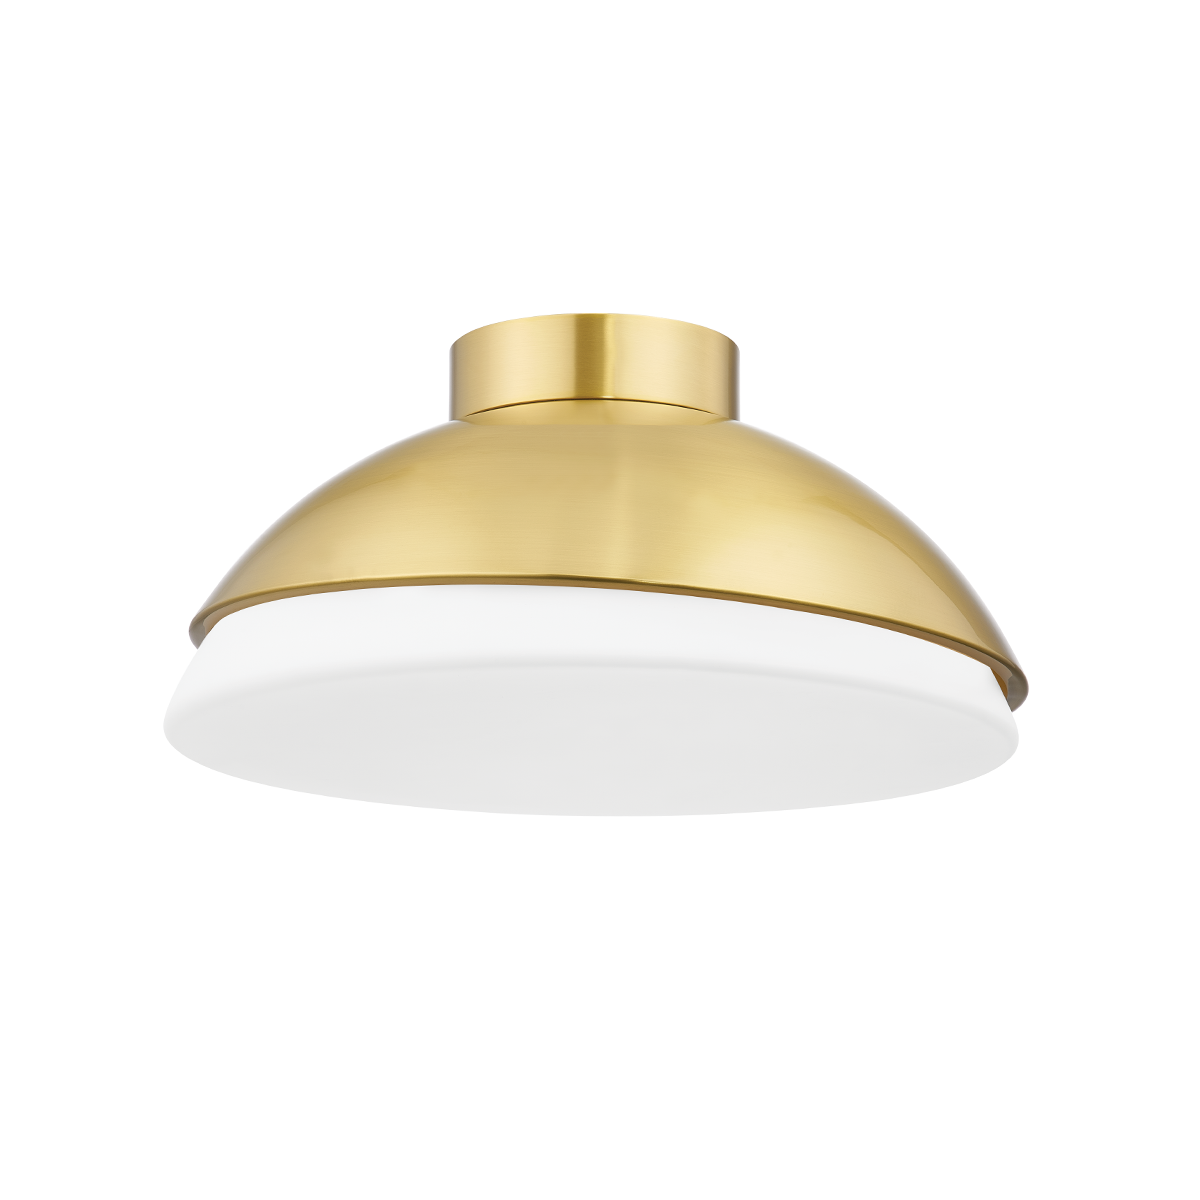 Steel Slanted Shade with Opal Glass Diffuser Flush Mount